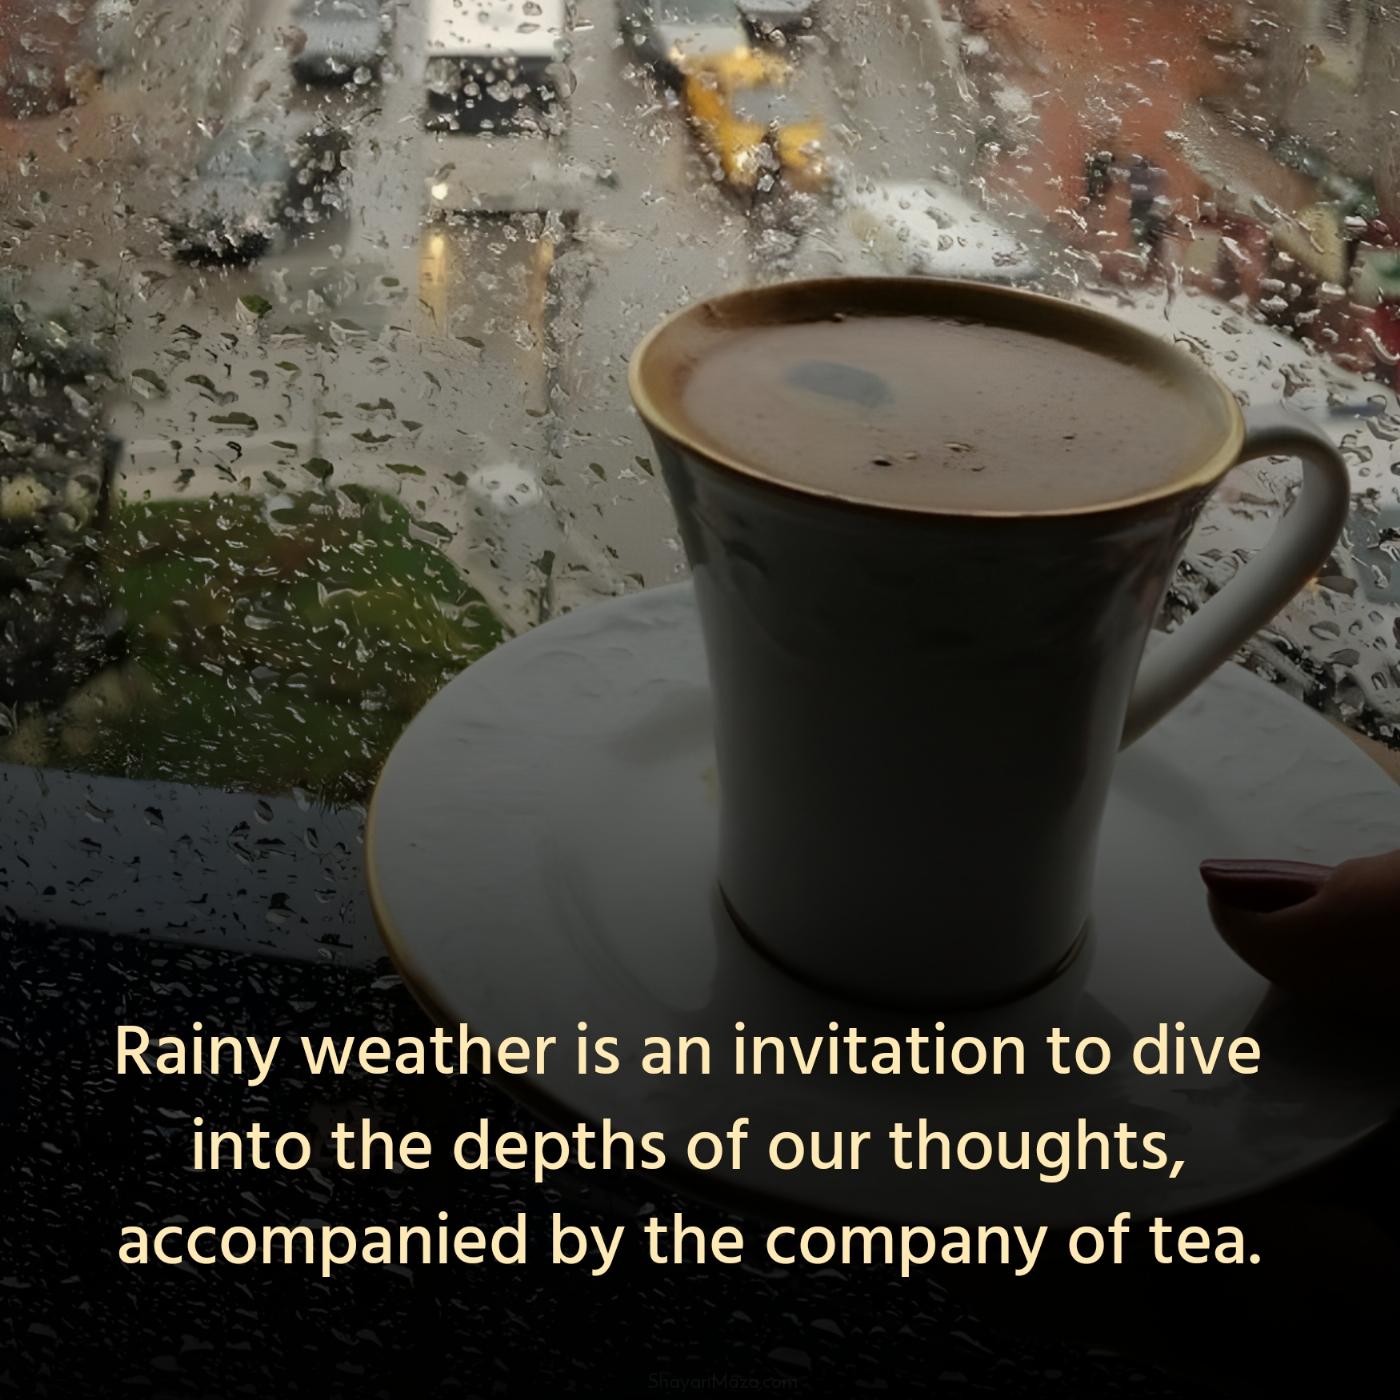 Rainy weather is an invitation to dive into the depths of our thoughts